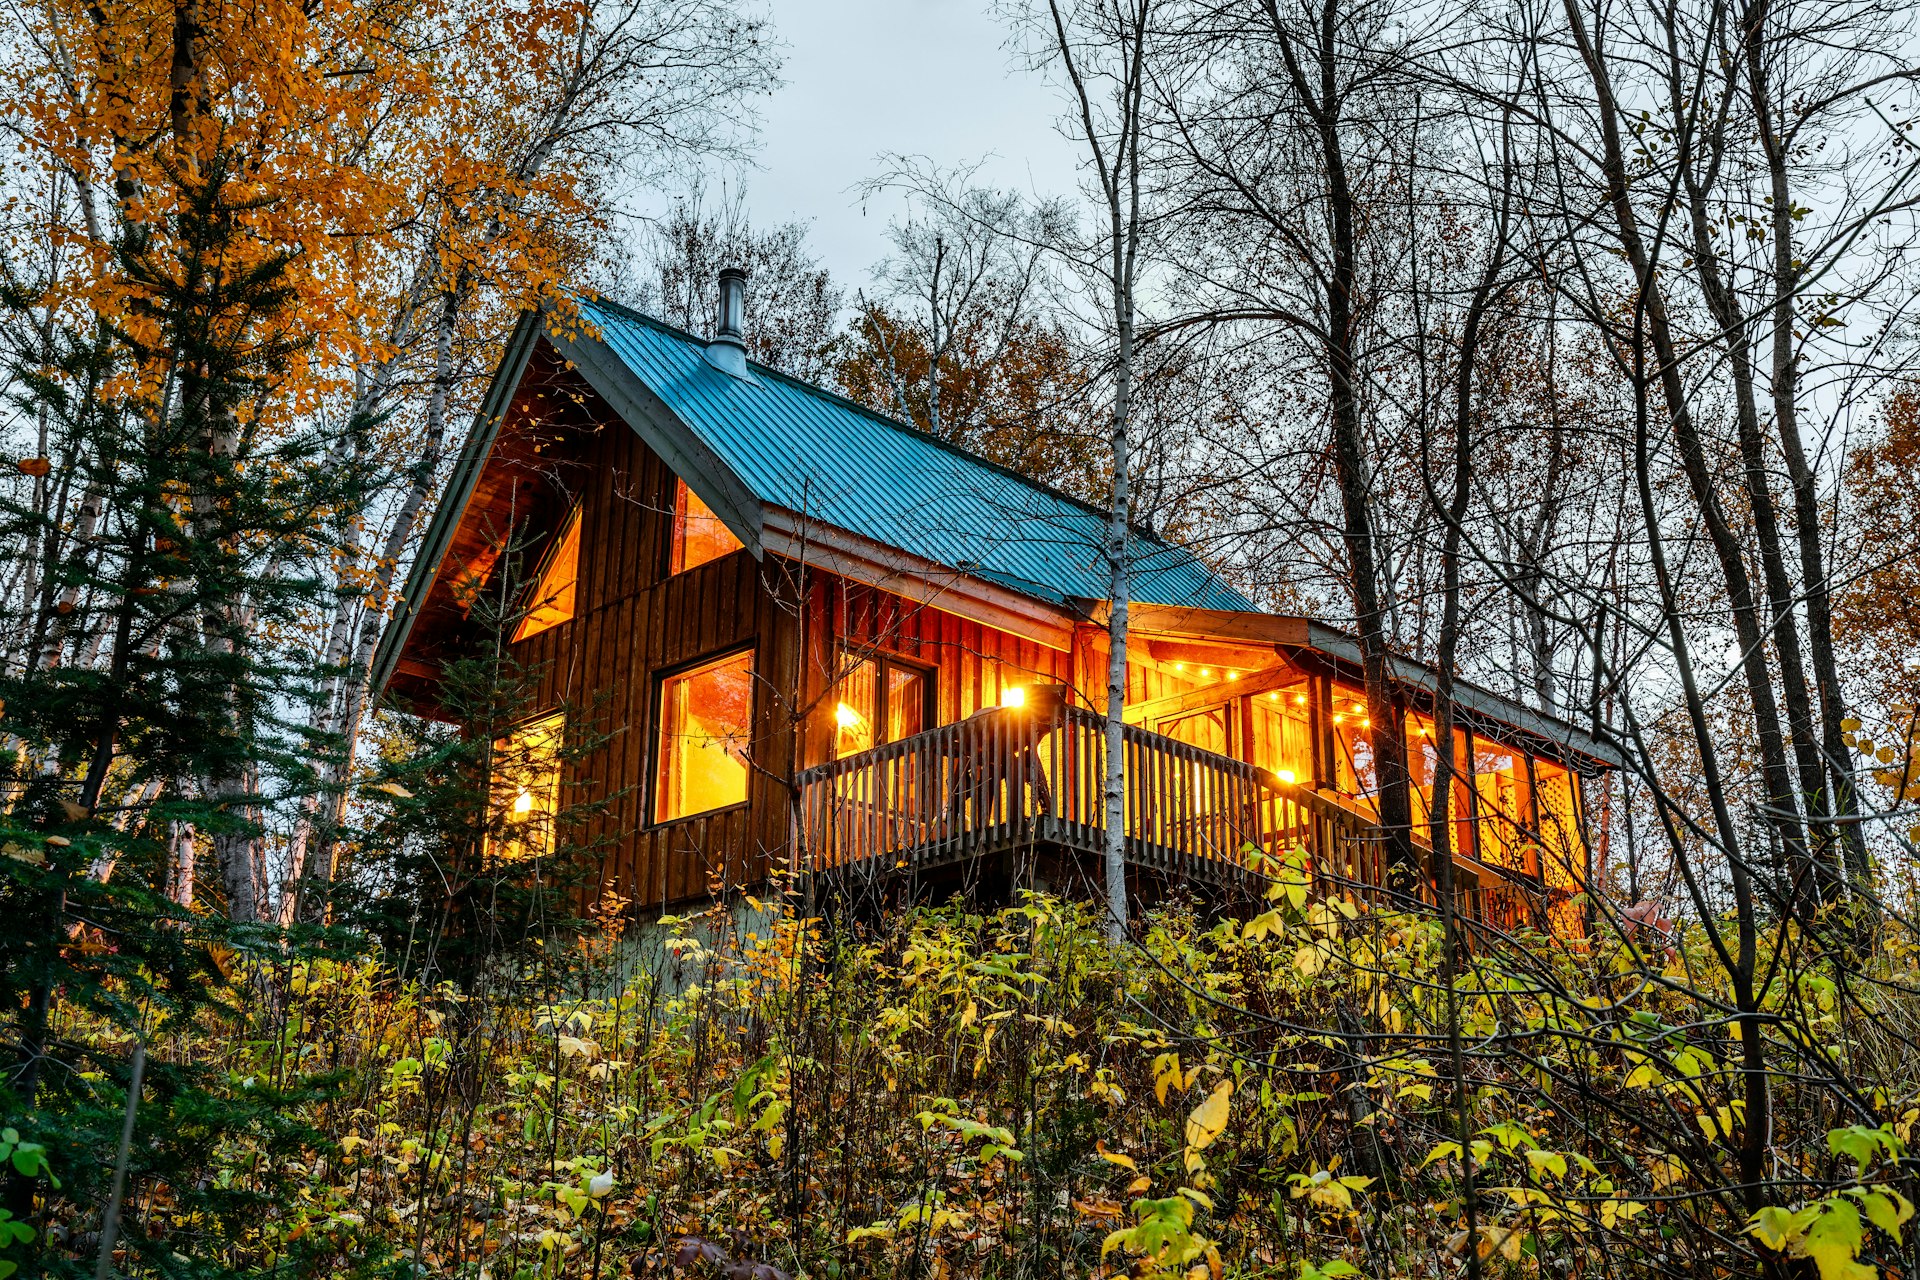 Wooden cabin in the woods, warm lights turned on inside.